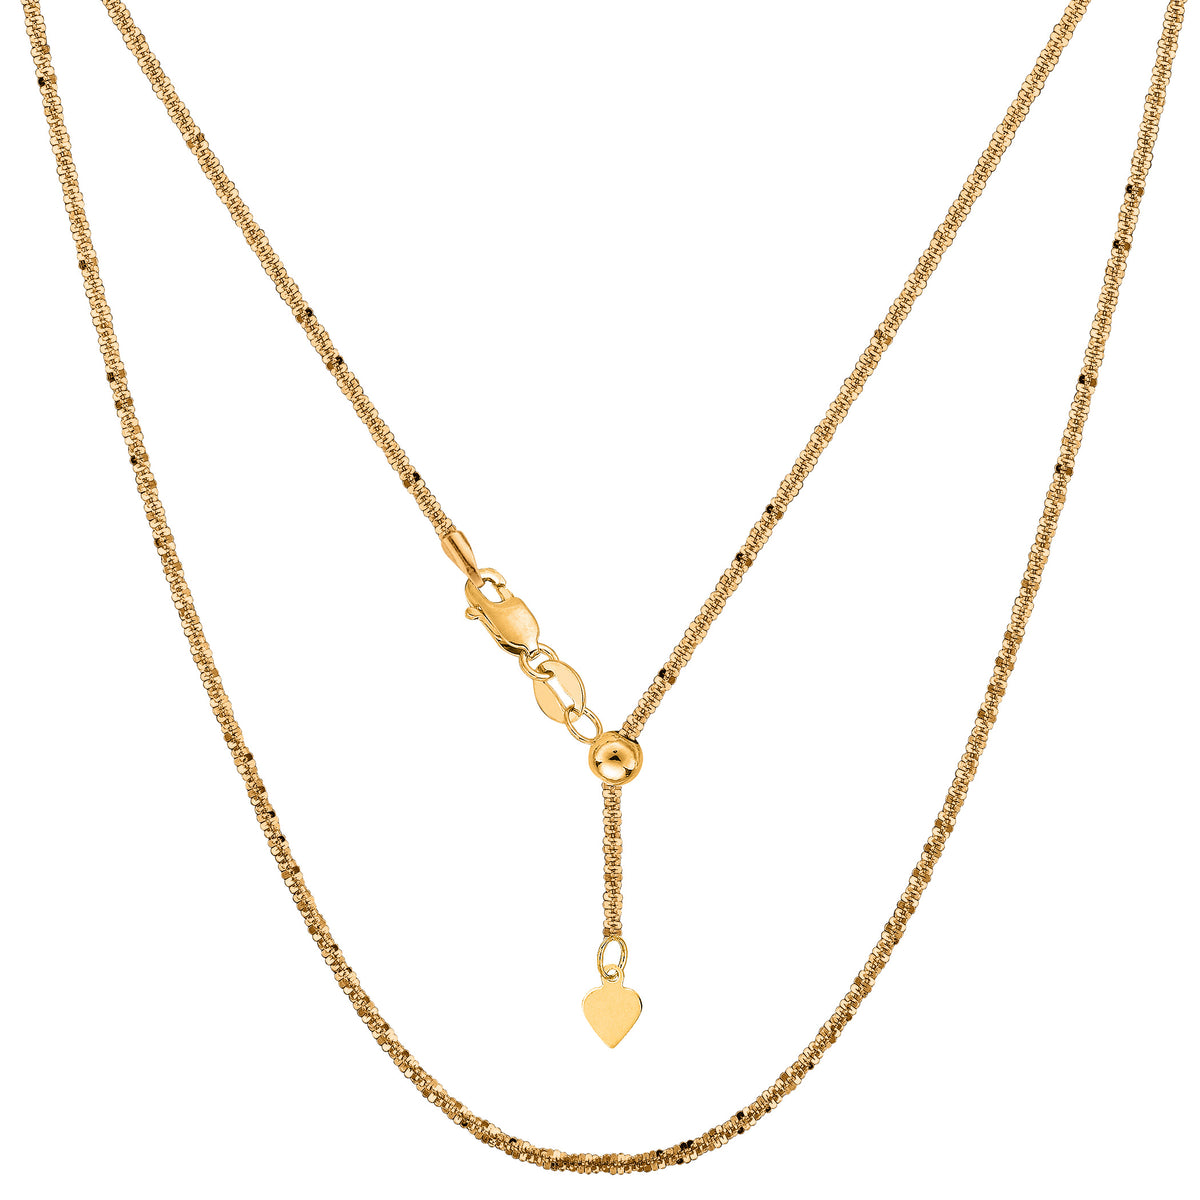 14k Yellow Gold Adjustable Sparkle Chain Necklace, 1.5mm, 22" fine designer jewelry for men and women